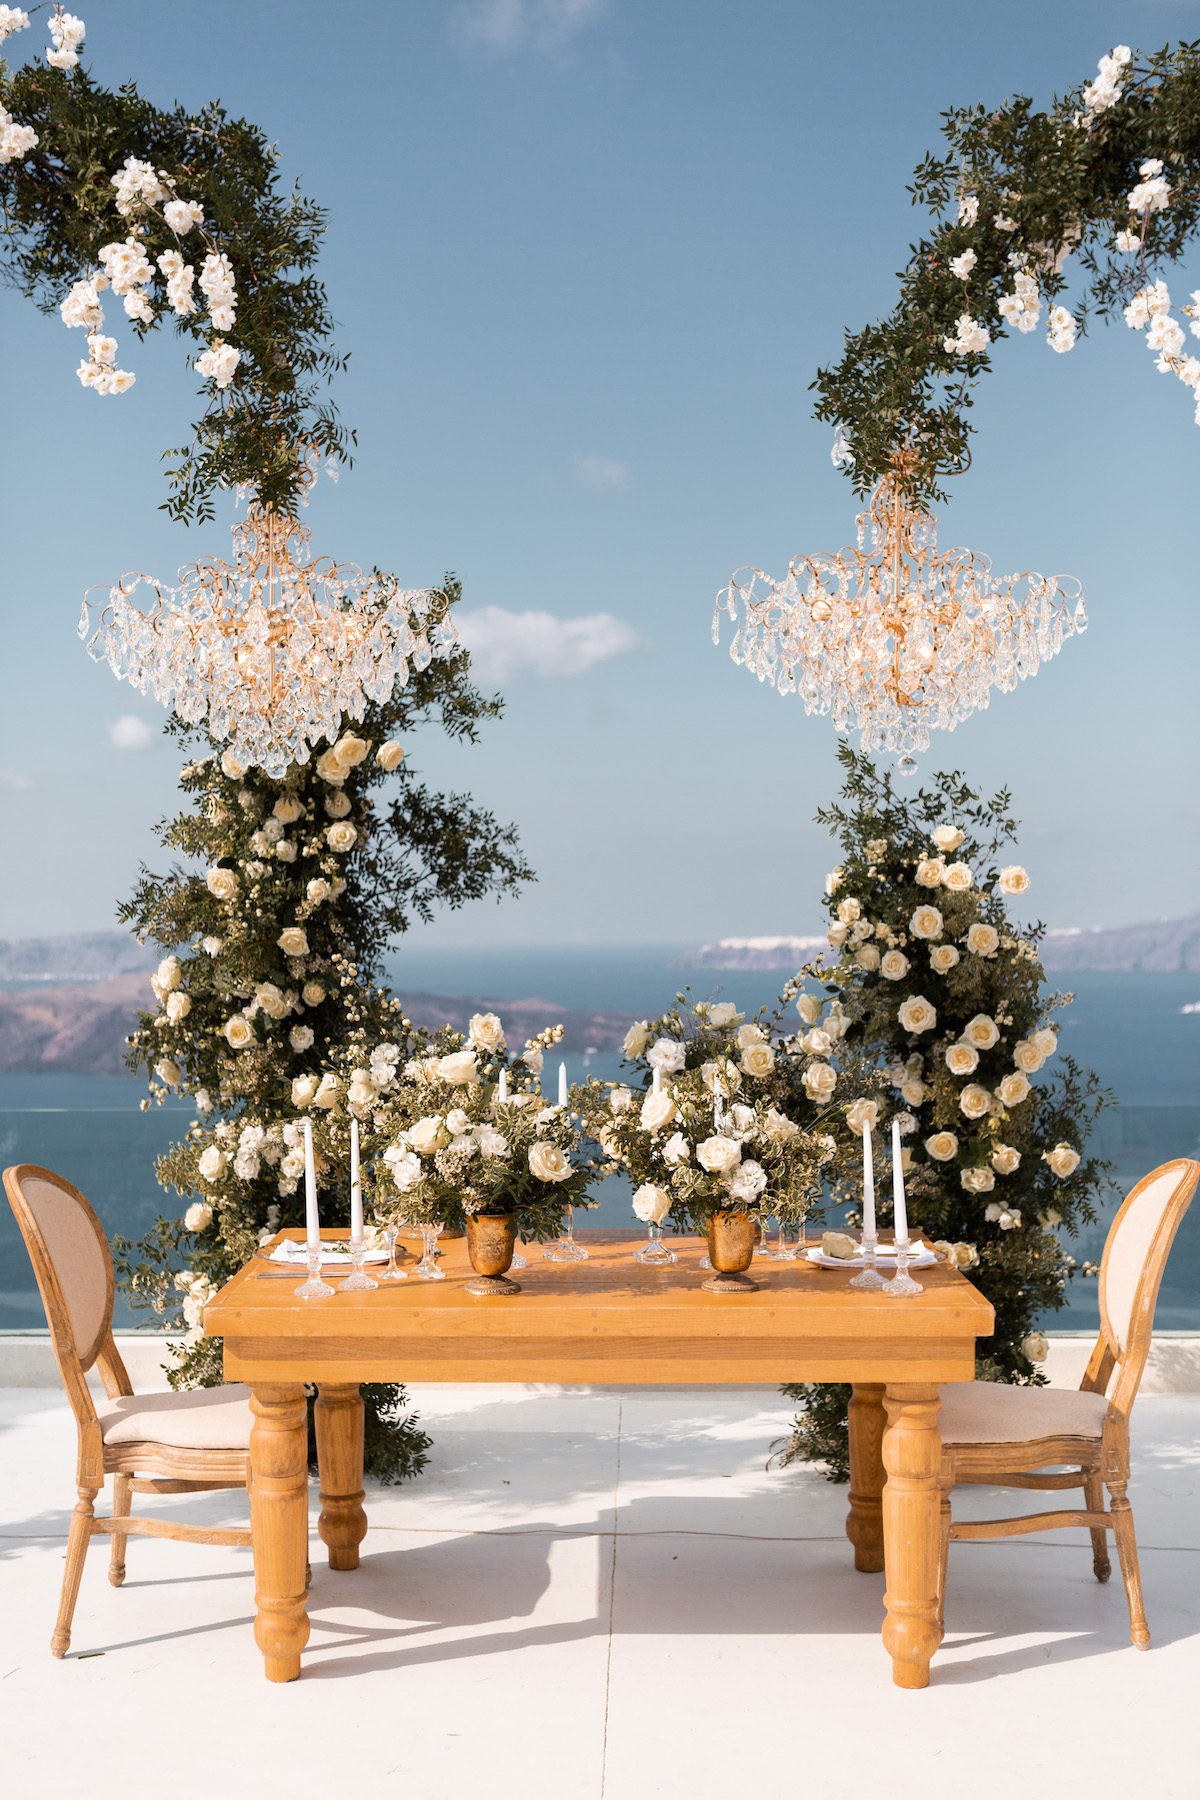 Luxury wedding sweetheart table decor with floral installations and chandeliers - Eva Rendl Photography